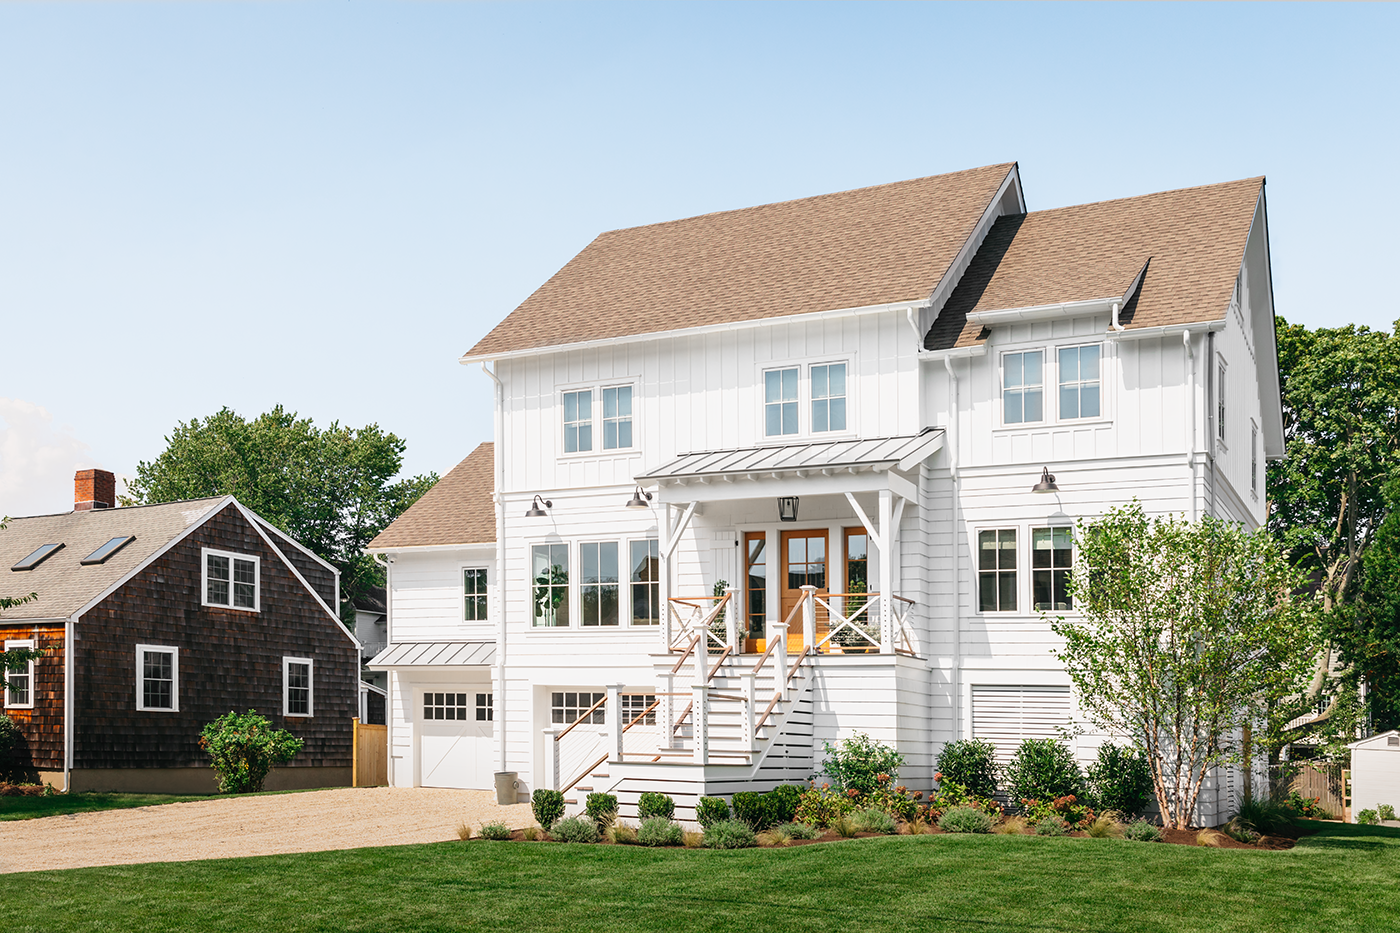 The exterior of Liz Joy’s remodeled home in Connecticut, featuring Marvin Elevate windows and doors.